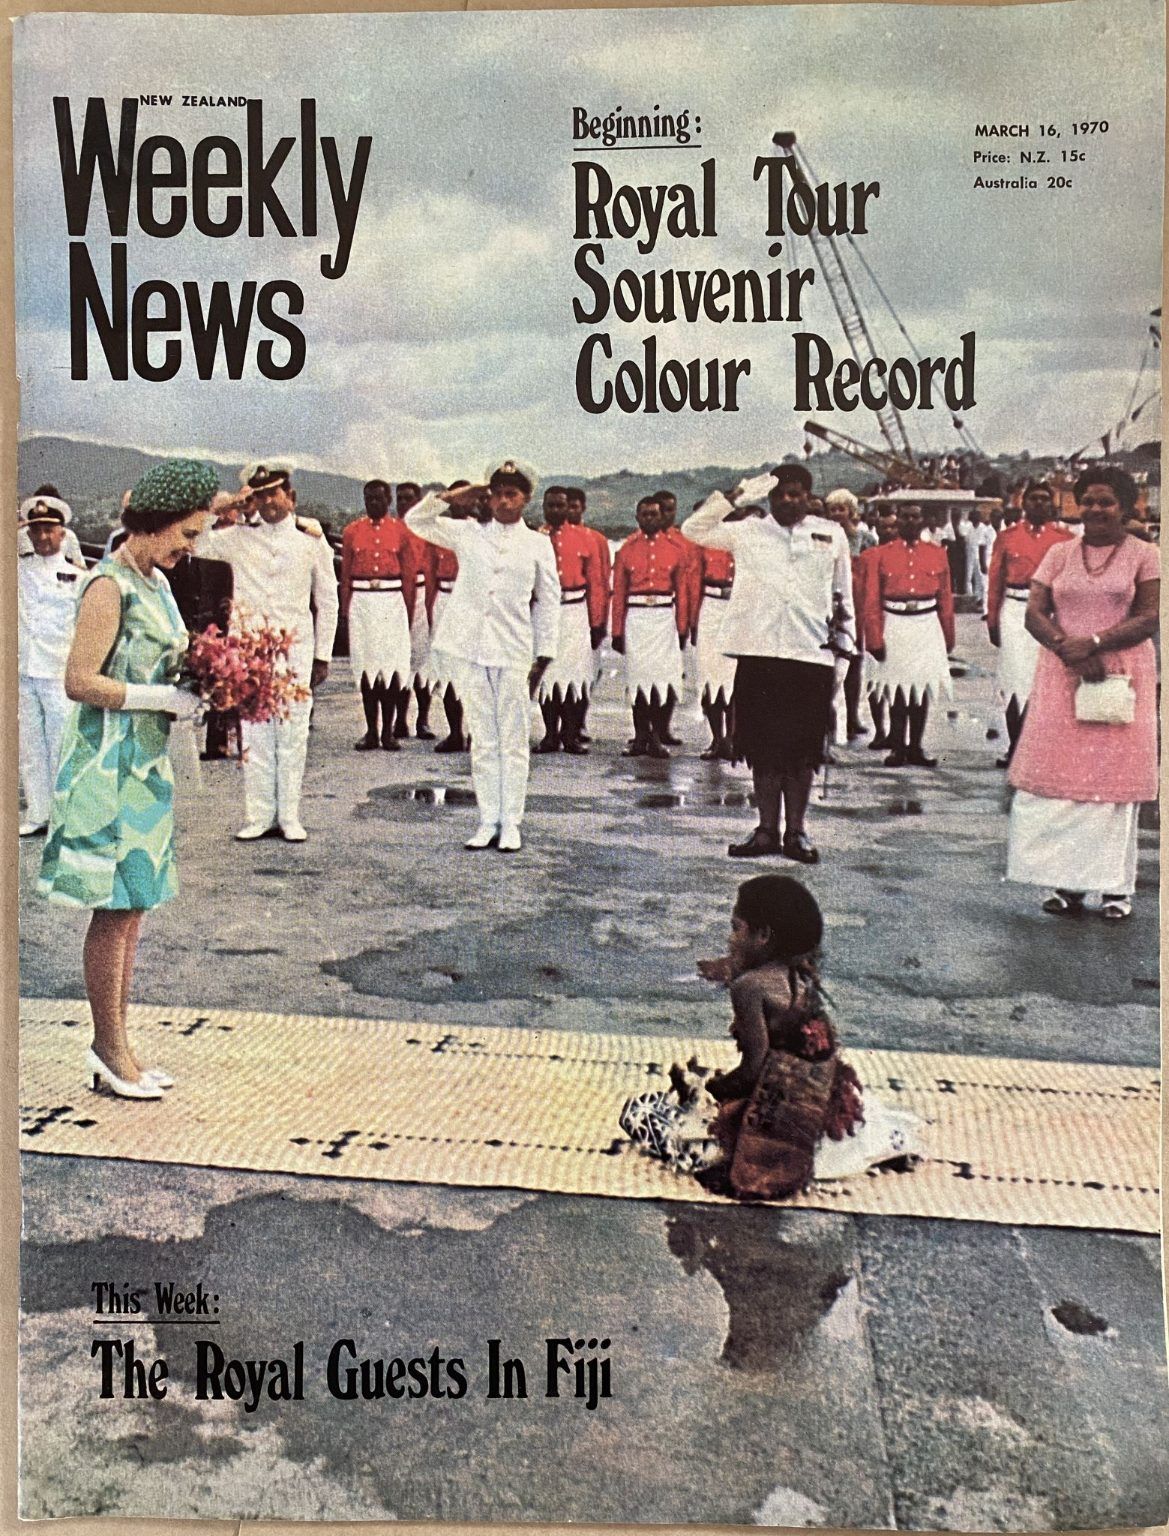 OLD NEWSPAPER: New Zealand Weekly News, No. 5546, 16 March 1970